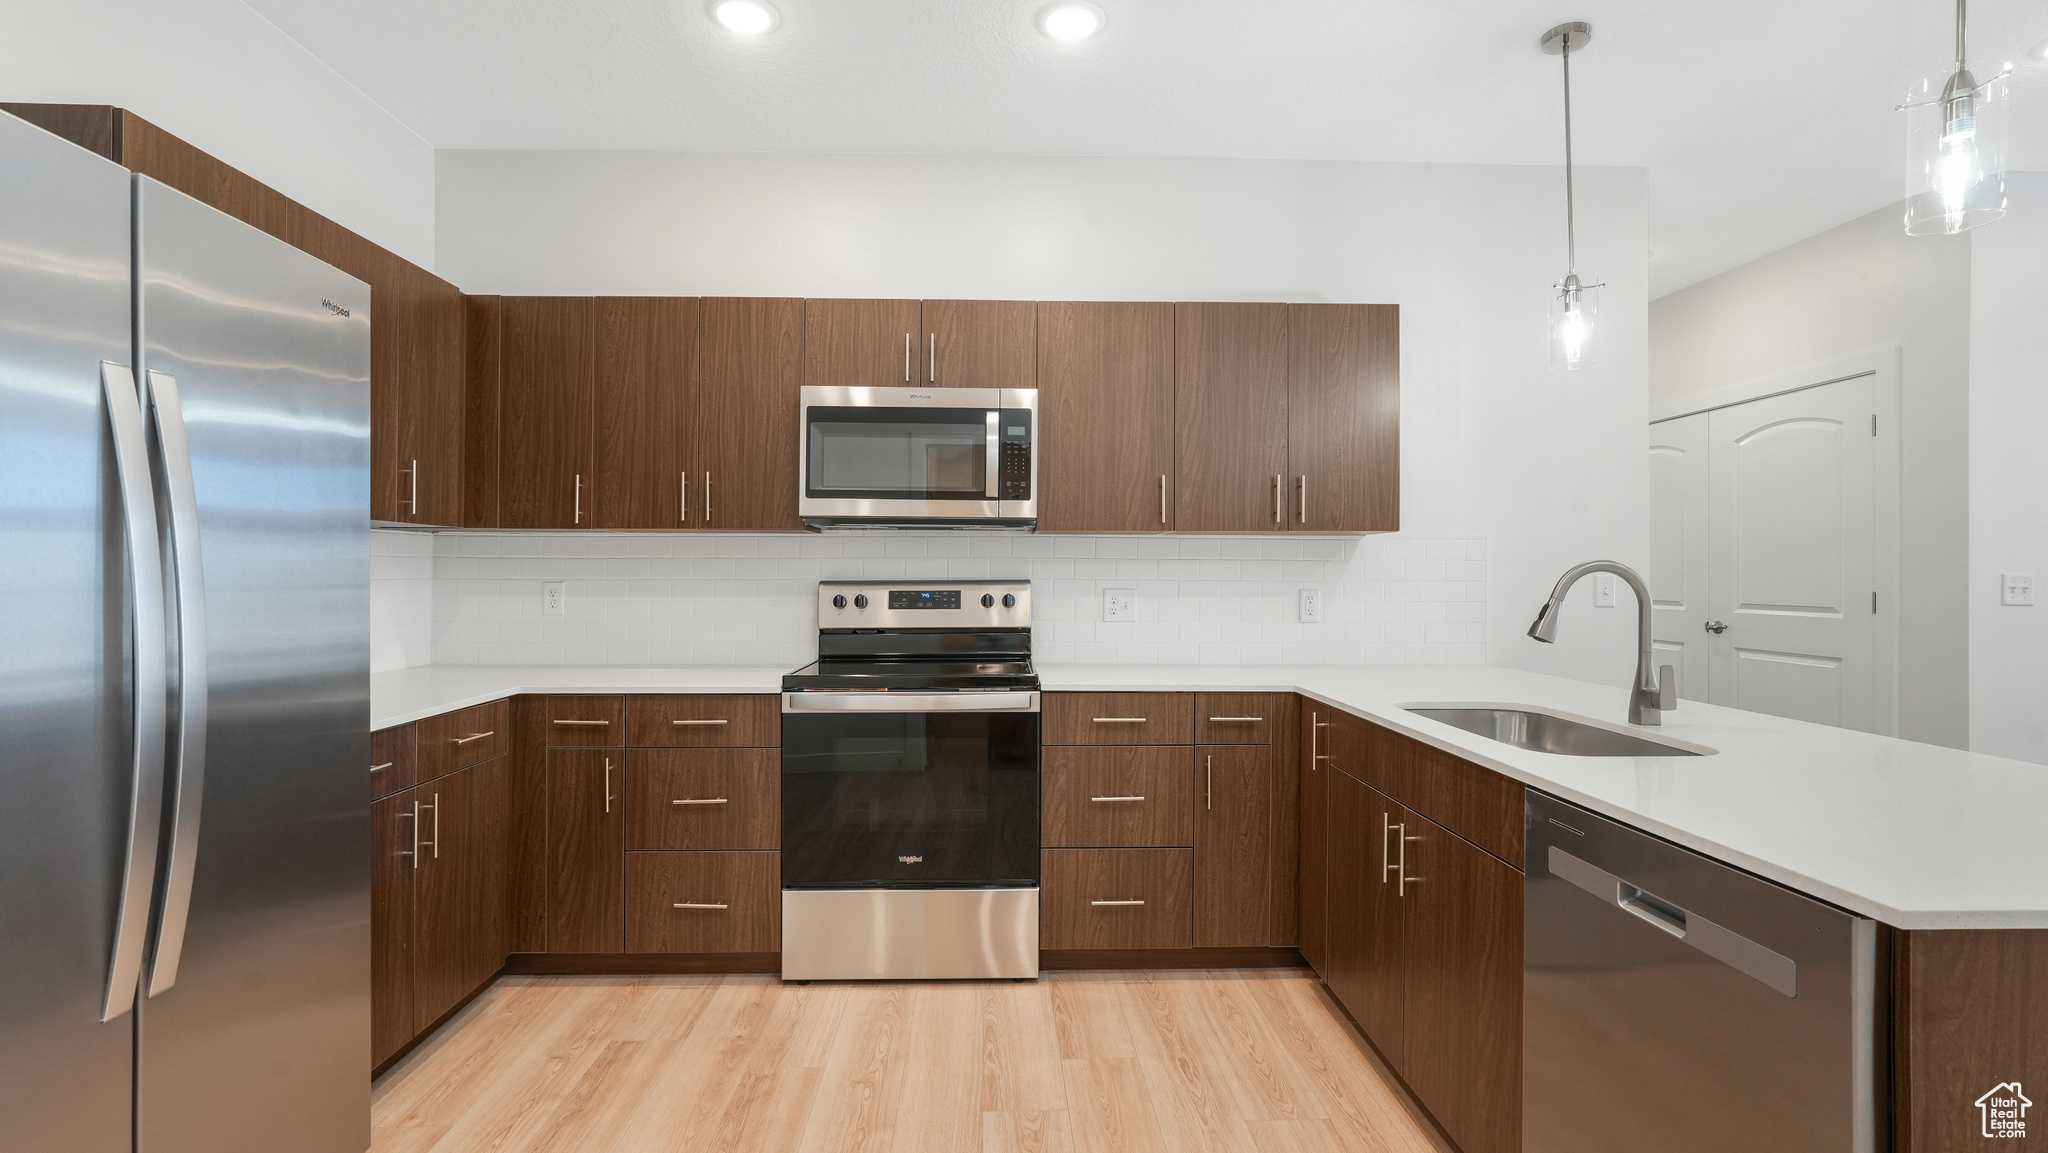 Kitchens include tile backsplash, quartz counters, and stainless steel appliances. Fridge Included!